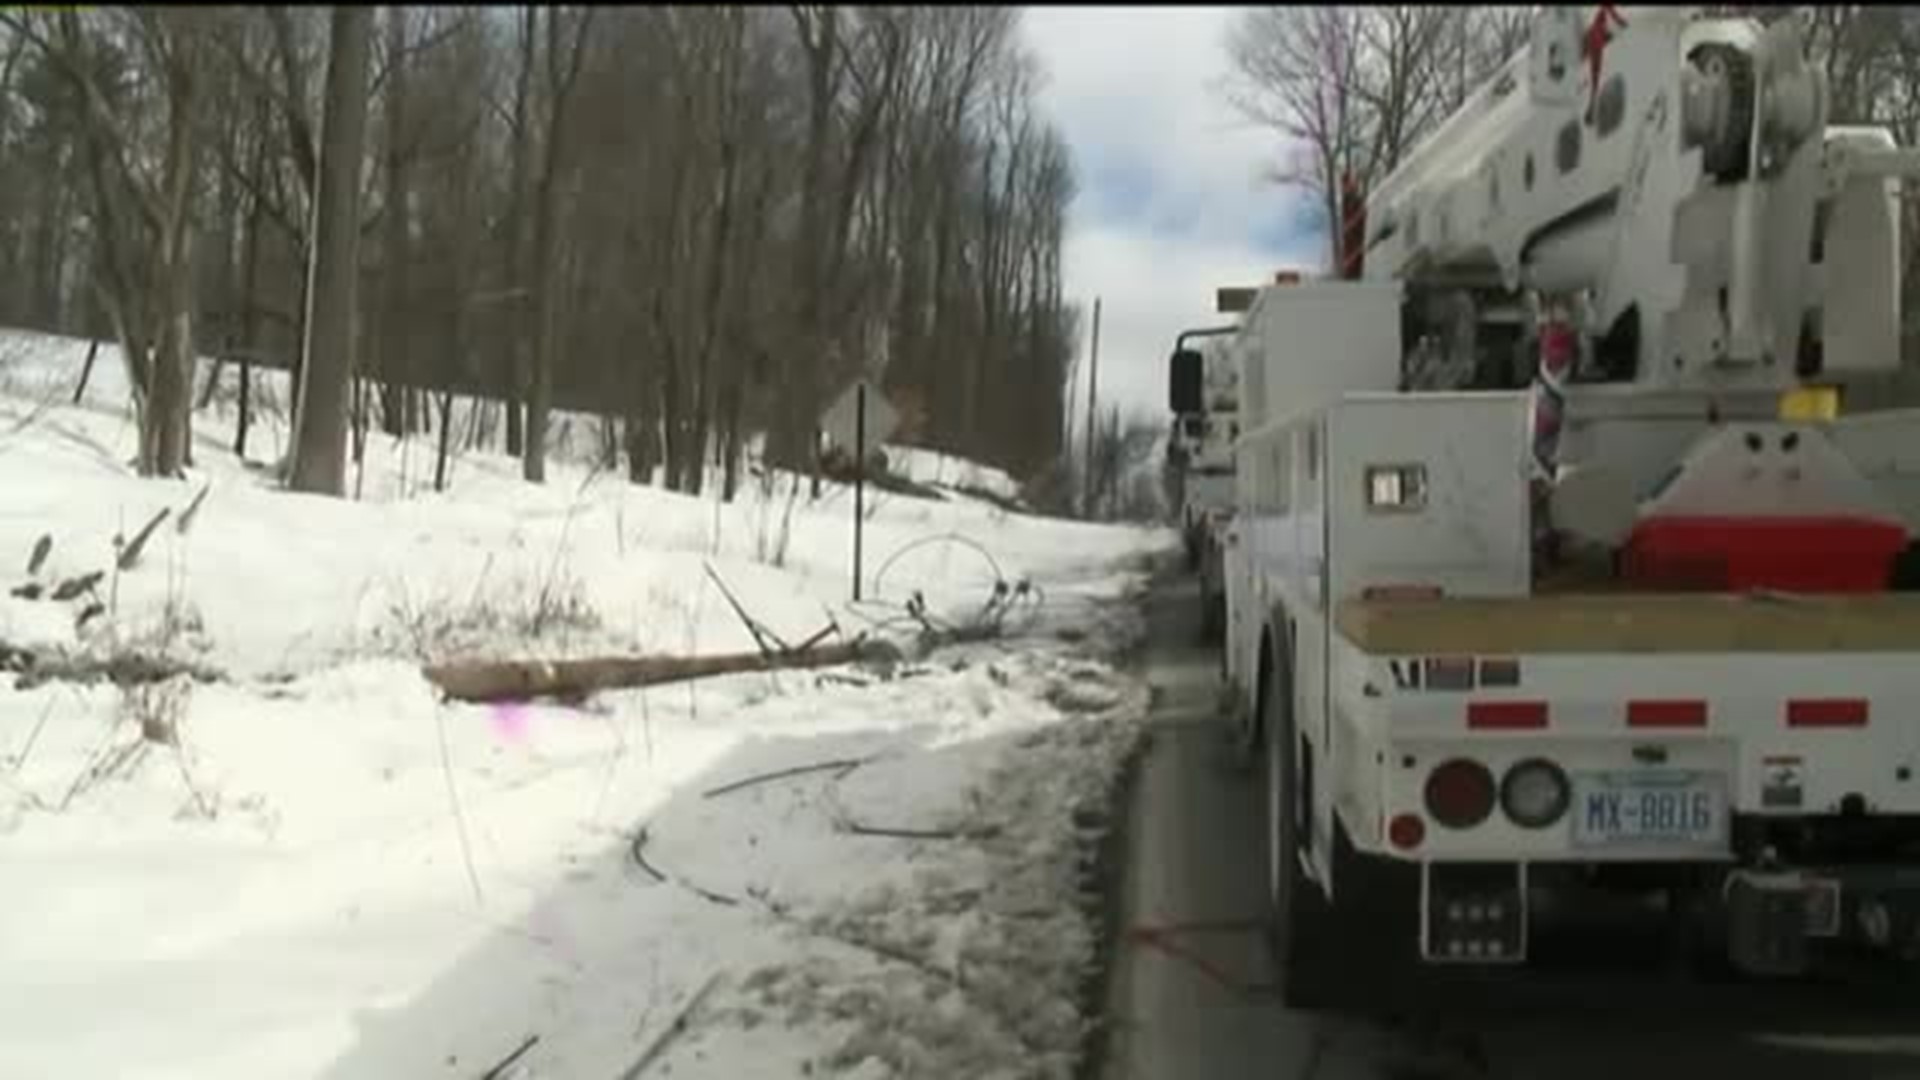 Crews in Wayne County Tackling Power Problems